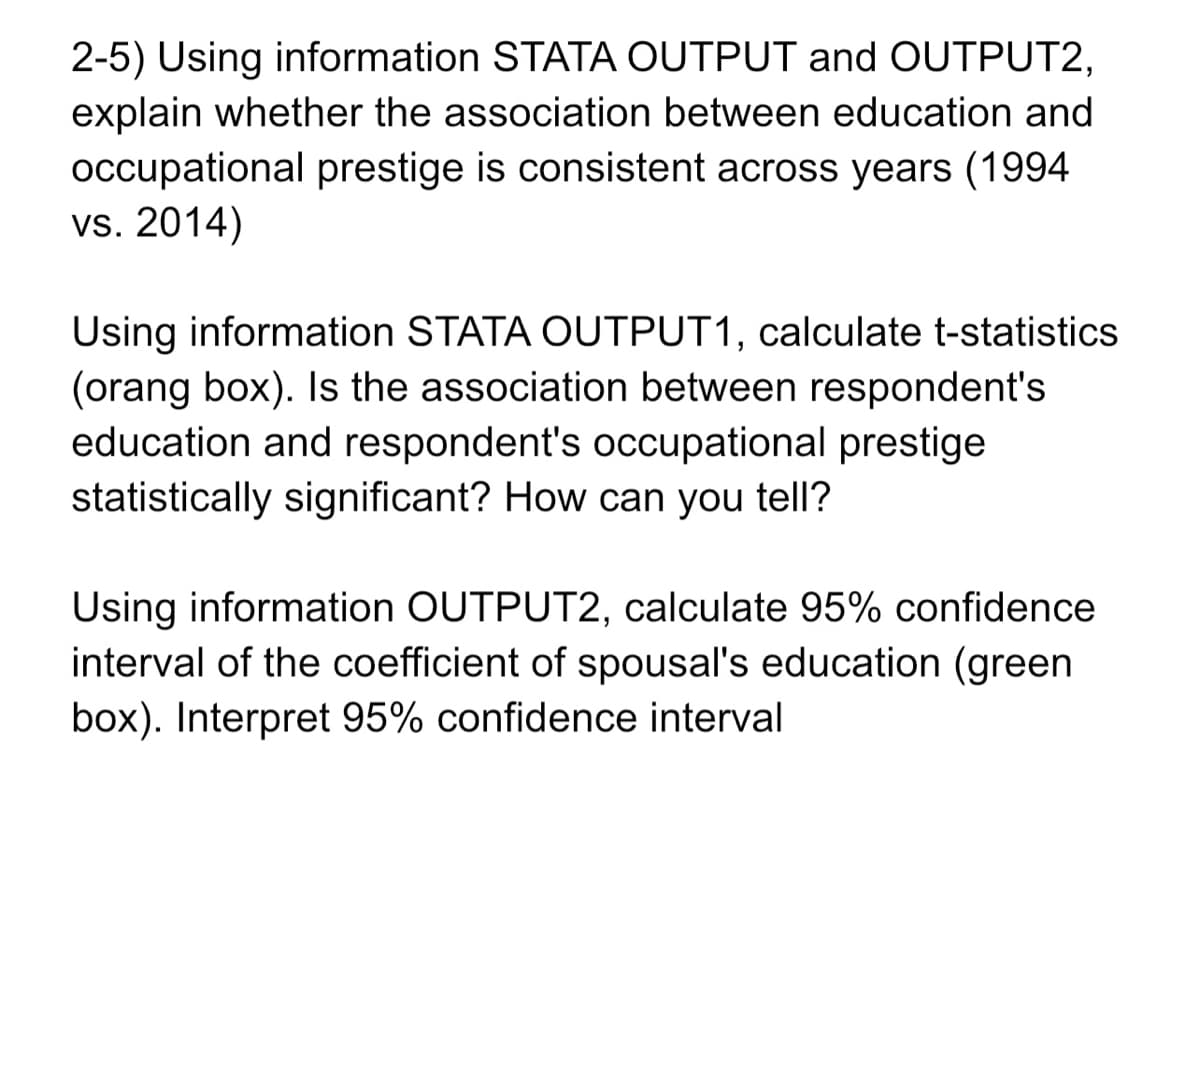 2-5) Using information STATA OUTPUT and OUTPUT2,
explain whether the association between education and
occupational prestige is consistent across years (1994
vs. 2014)
Using information STATA OUTPUT1, calculate t-statistics
(orang box). Is the association between respondent's
education and respondent's occupational prestige
statistically significant? How can you tell?
Using information OUTPUT2, calculate 95% confidence
interval of the coefficient of spousal's education (green
box). Interpret 95% confidence interval